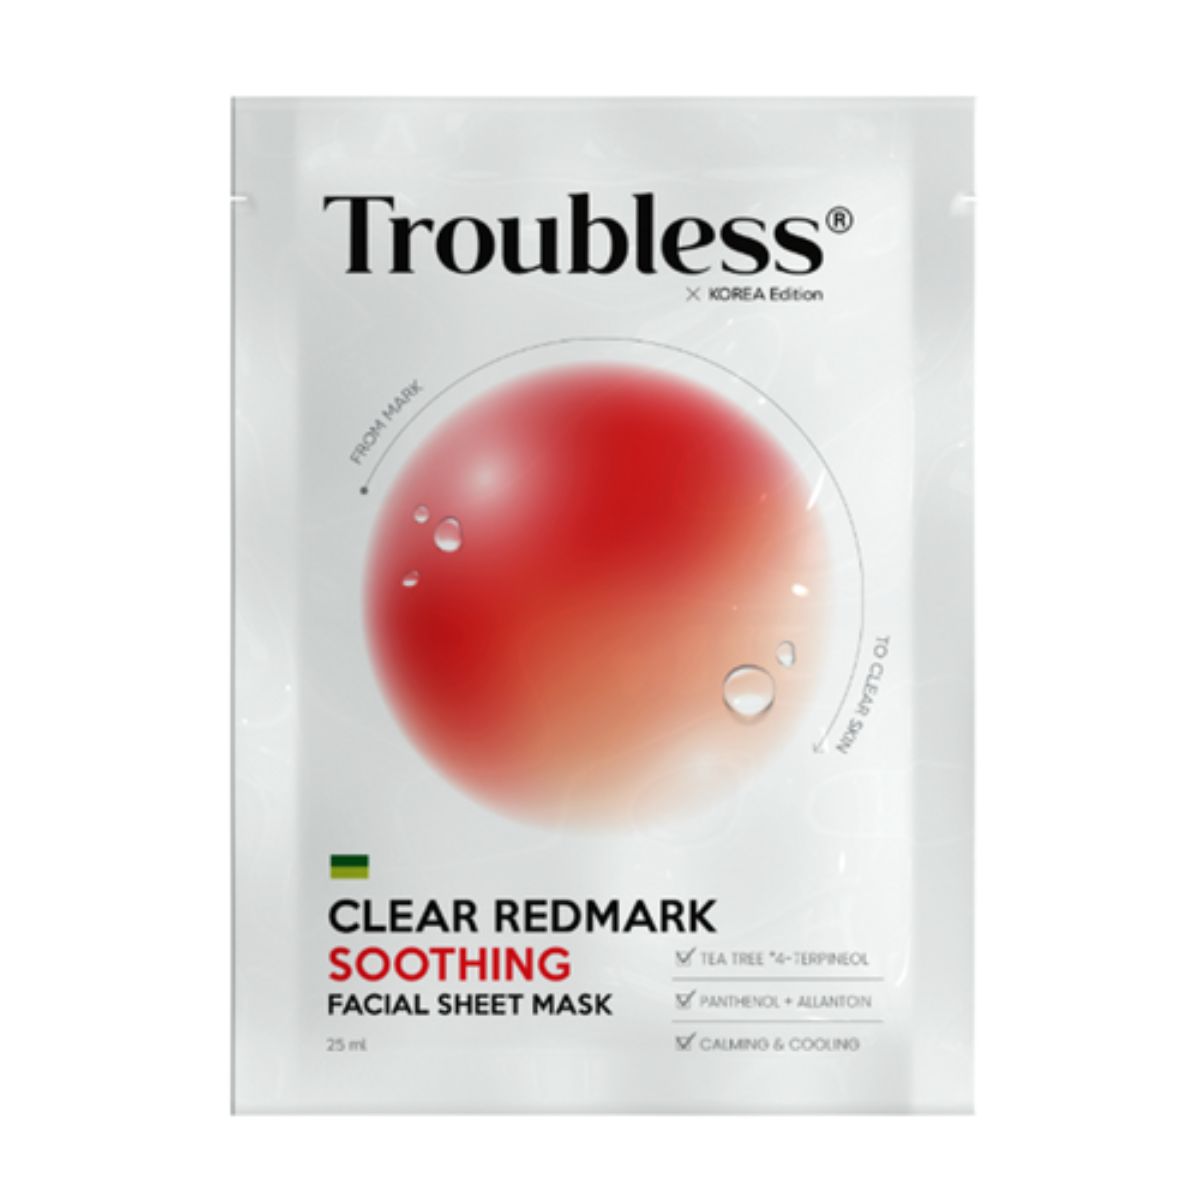 CLEAR REDMARK SOOTHING FACIAL SHEET MASK